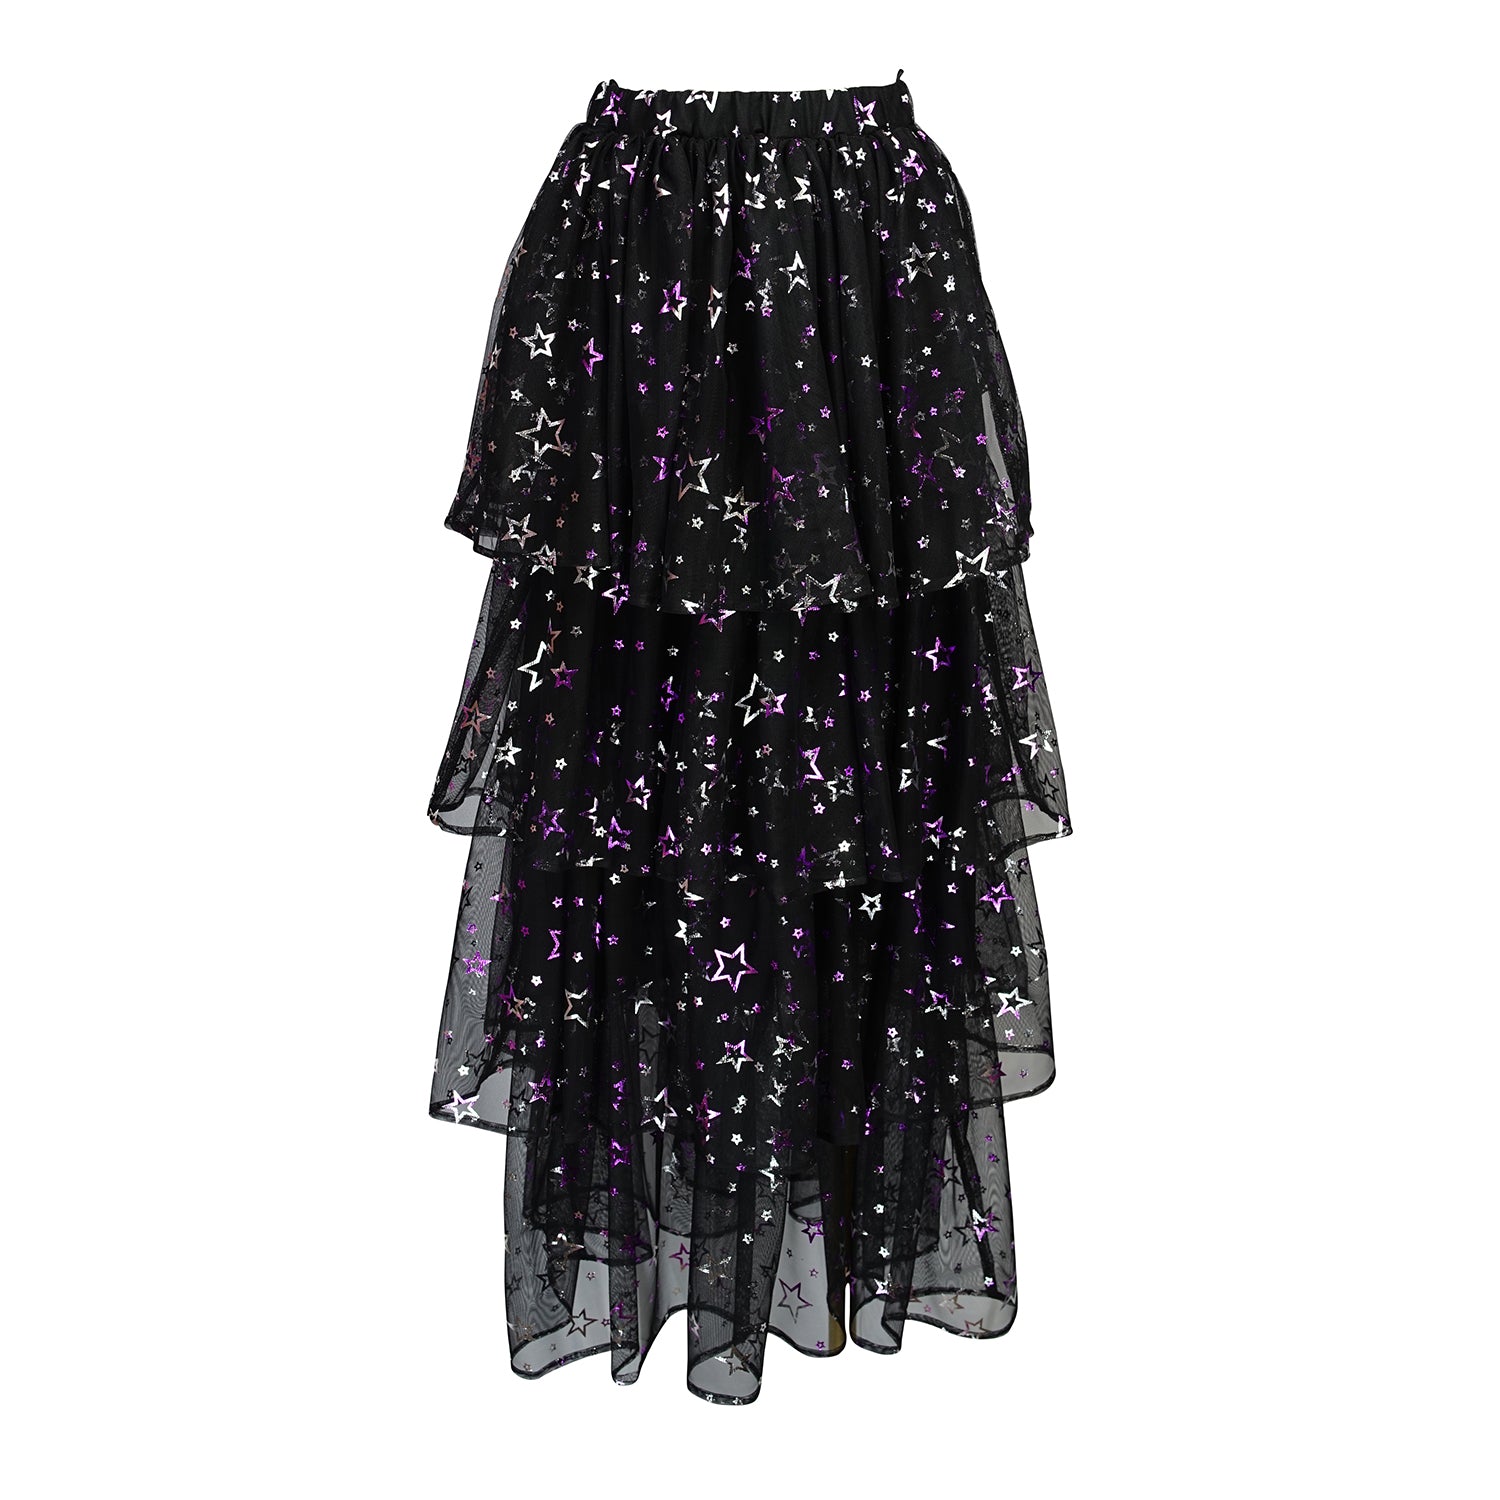 A tiered maxi skirt. Crafted with four tiers of layered black and metallic silver/purple stars and an elastic waist for all-day comfort. High waist with ankle hem. 